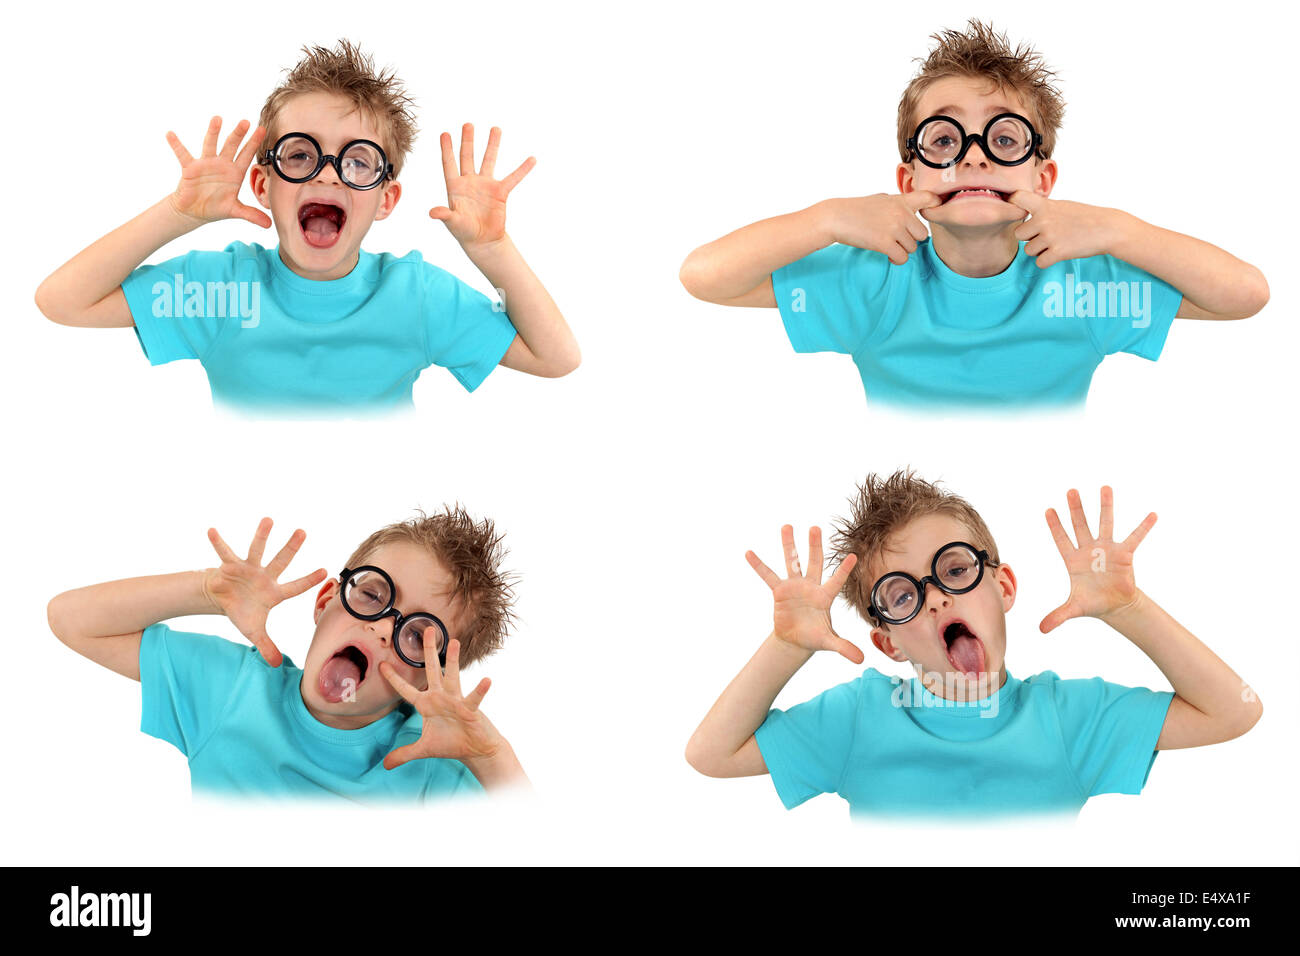 Child pulling faces Stock Photo